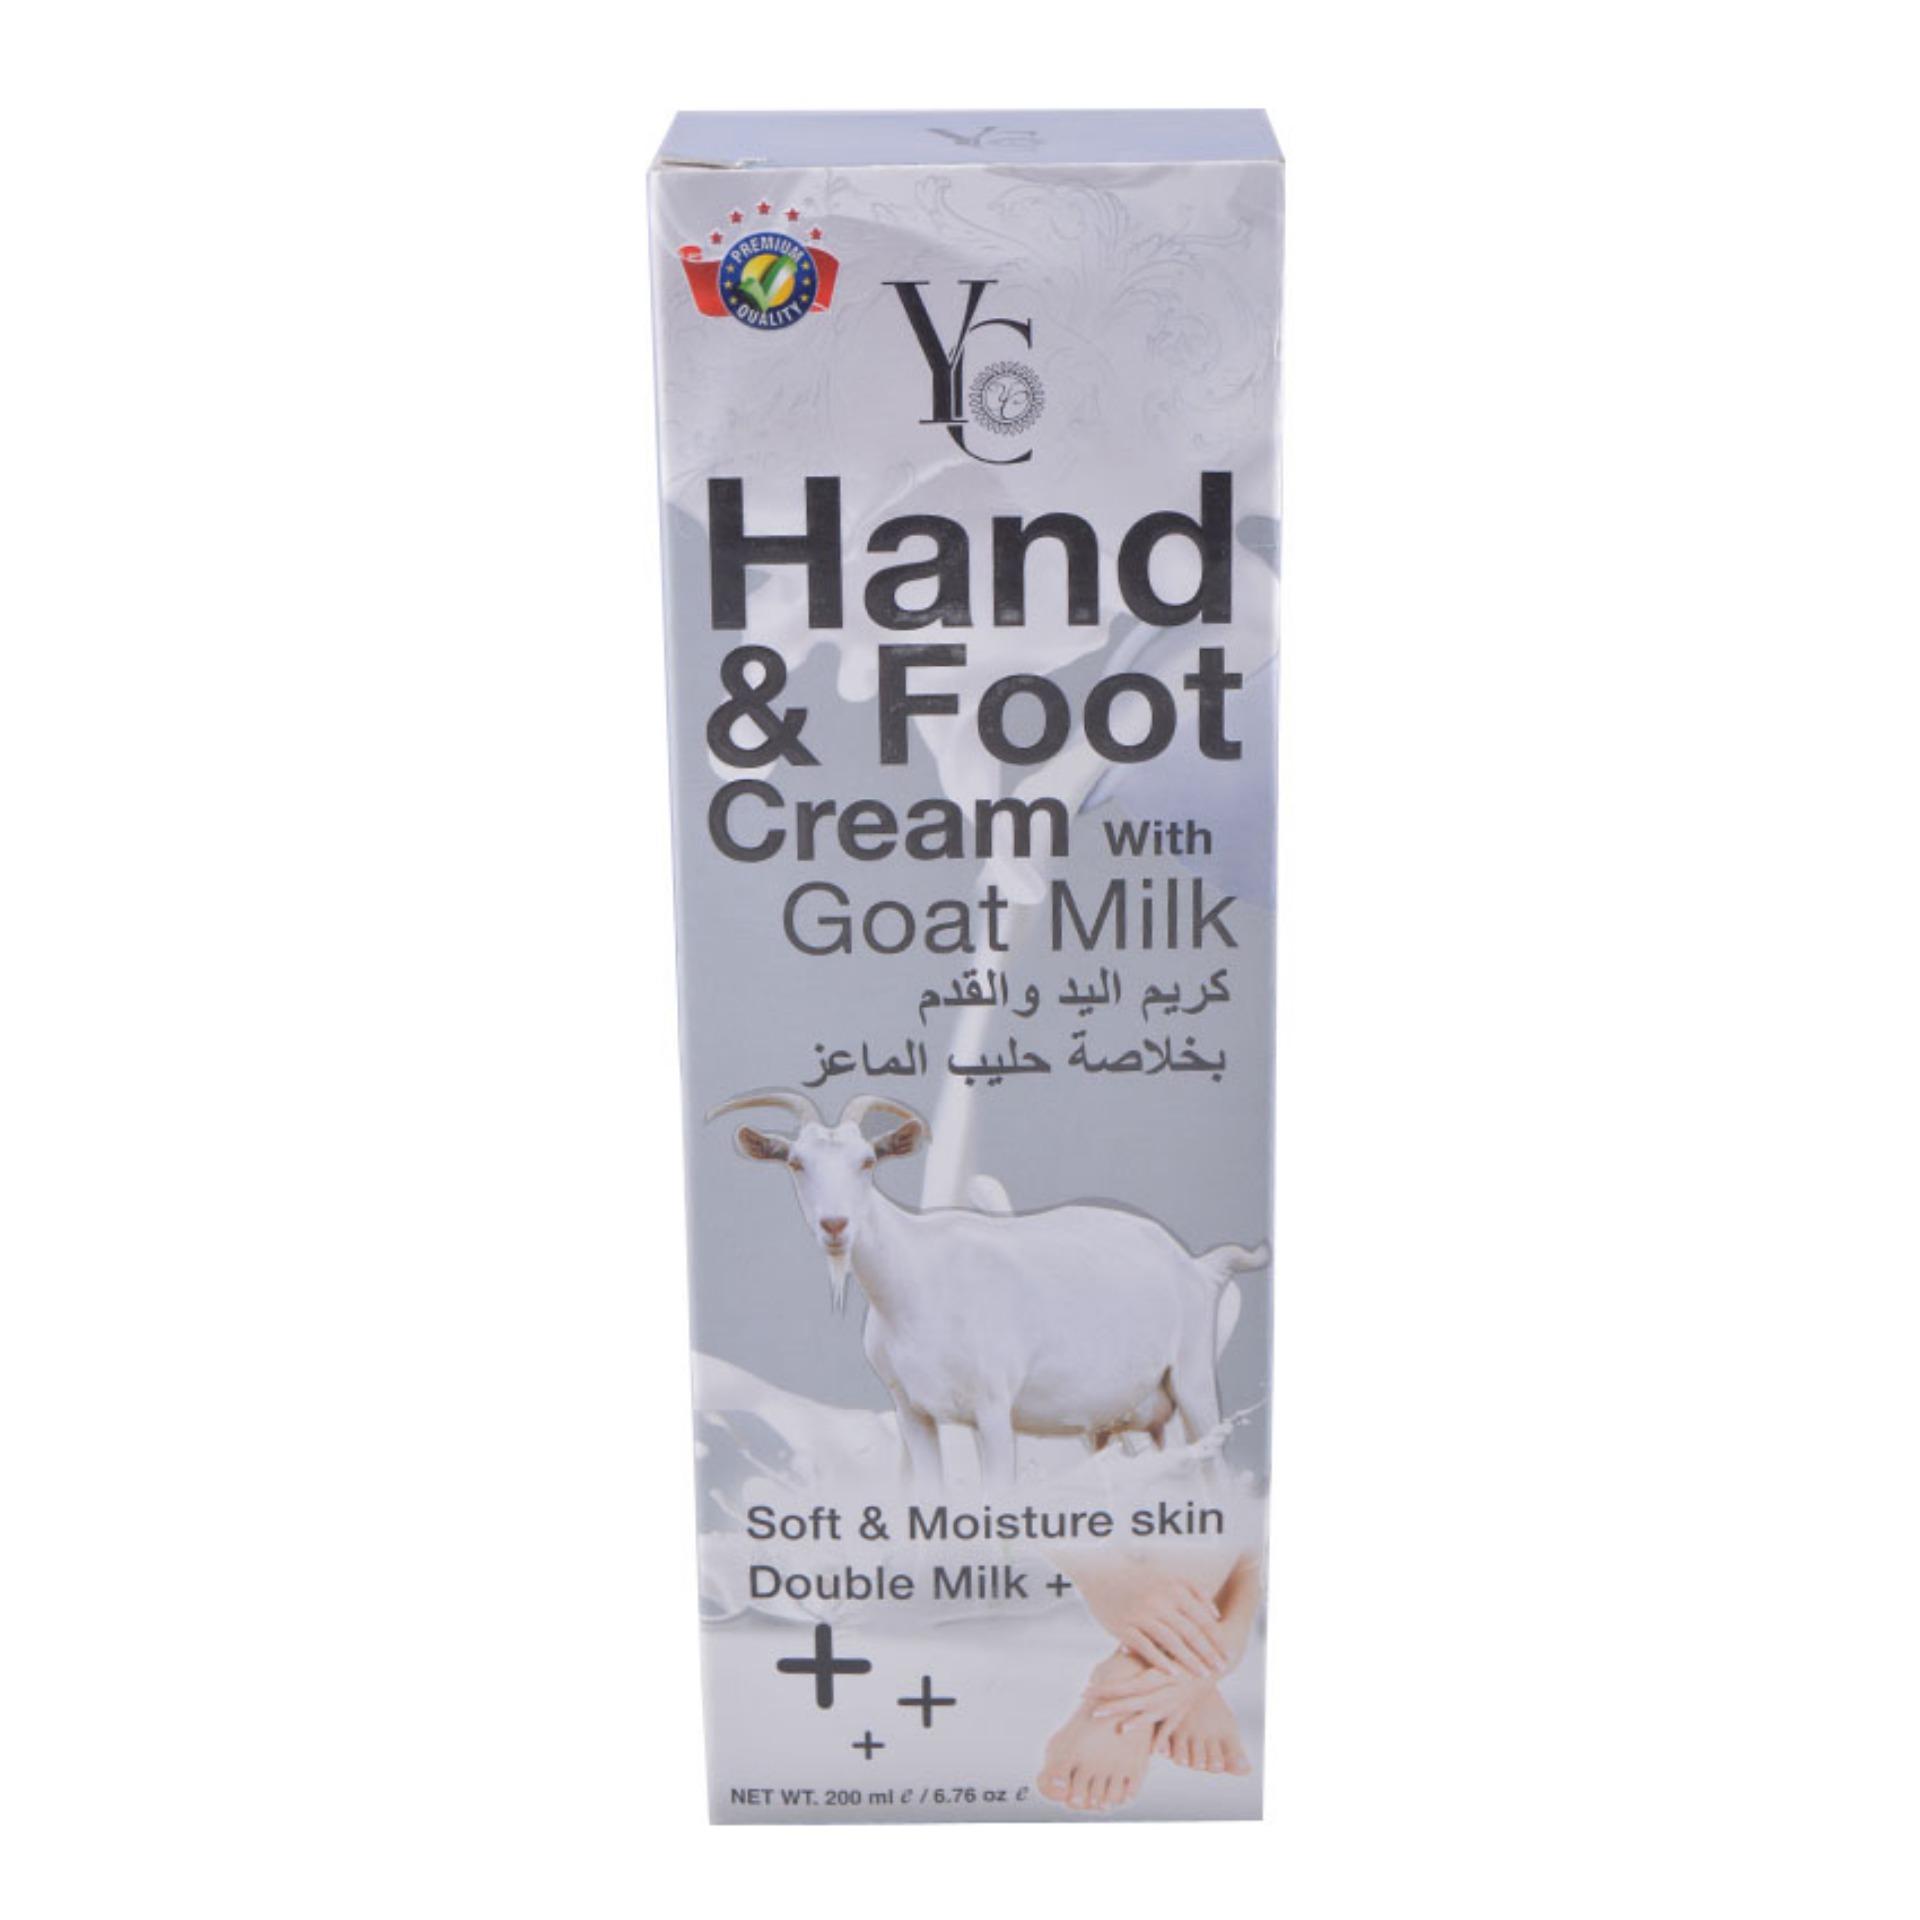 Hand and Foot Cream with Goat Milk